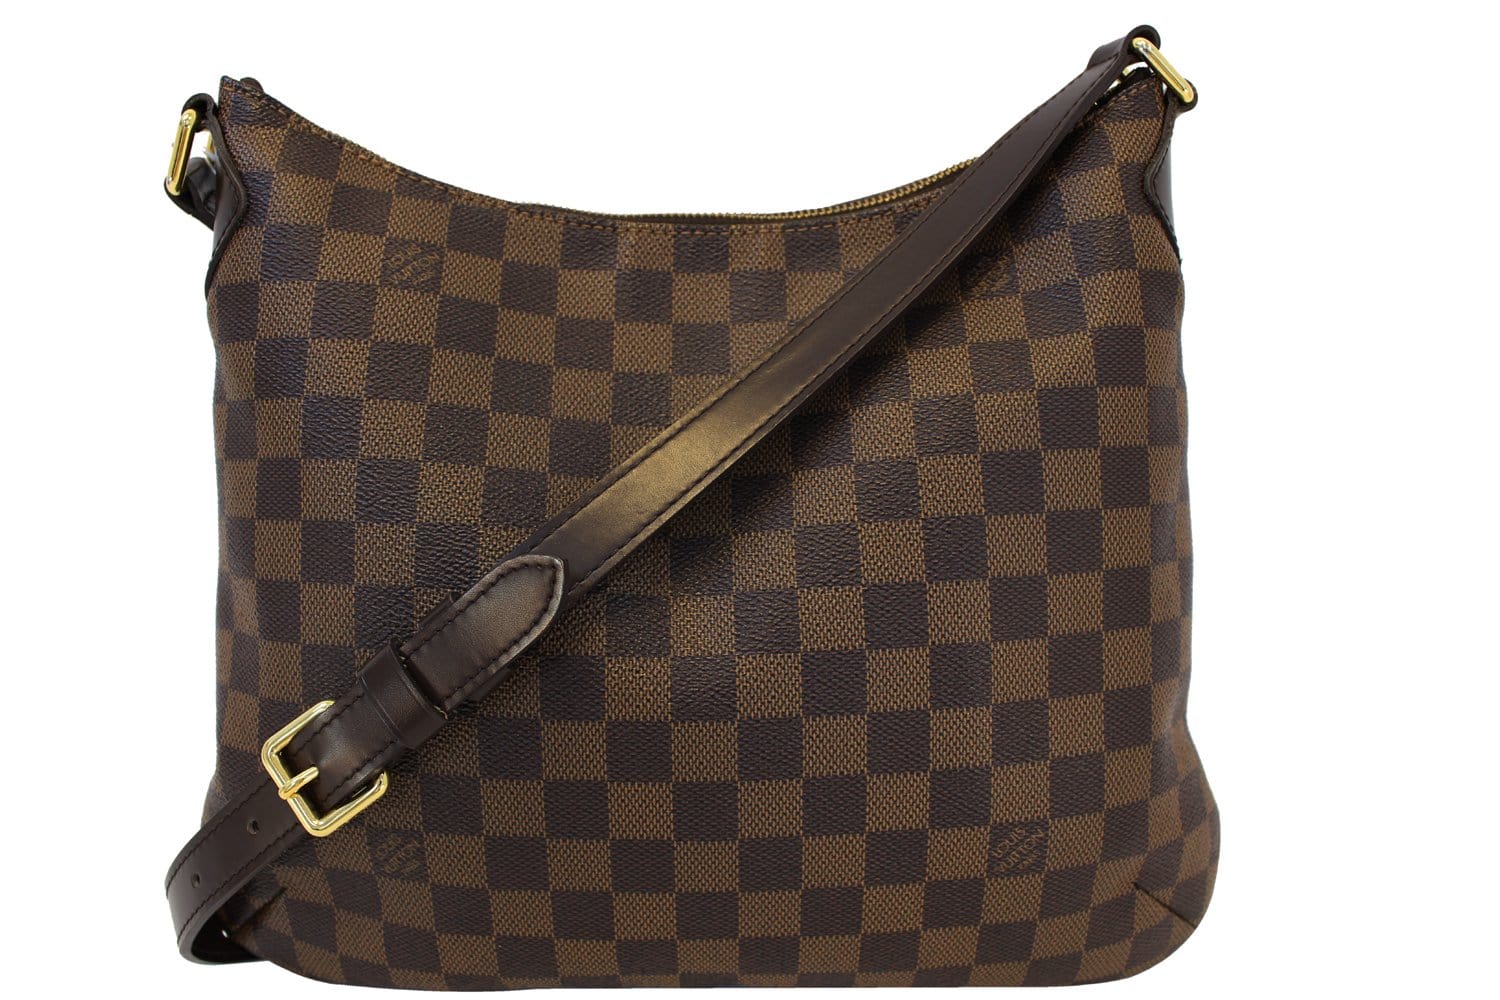 What's in my bag? Louis Vuitton Bloomsbury PM 